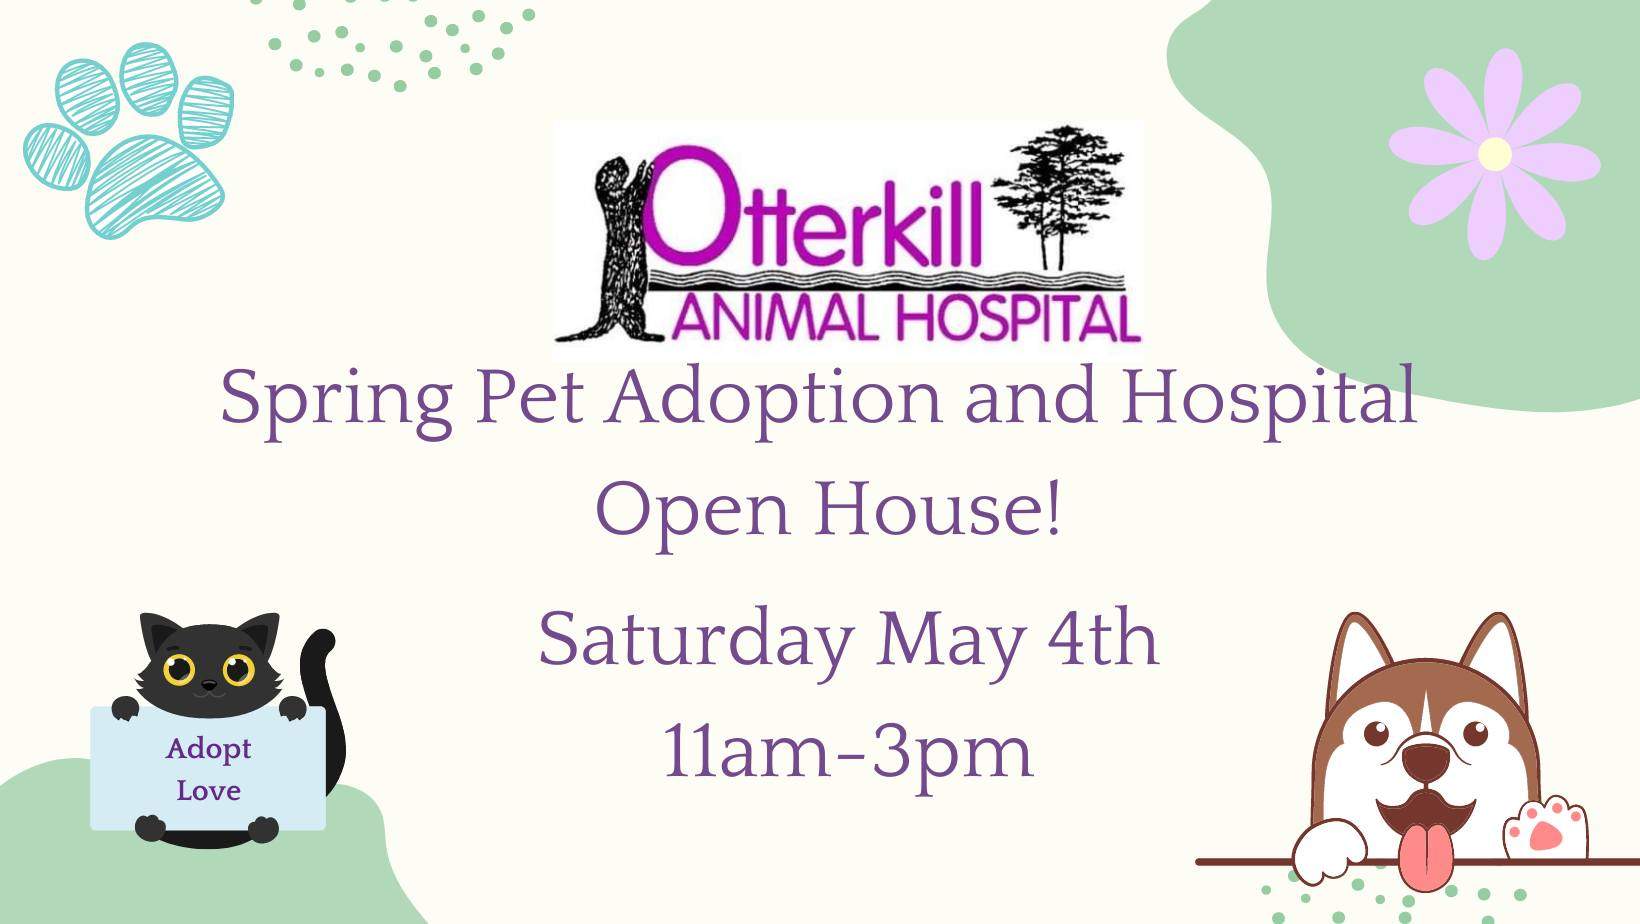 Open house and adoption event @ Otterkill Animal Hospital